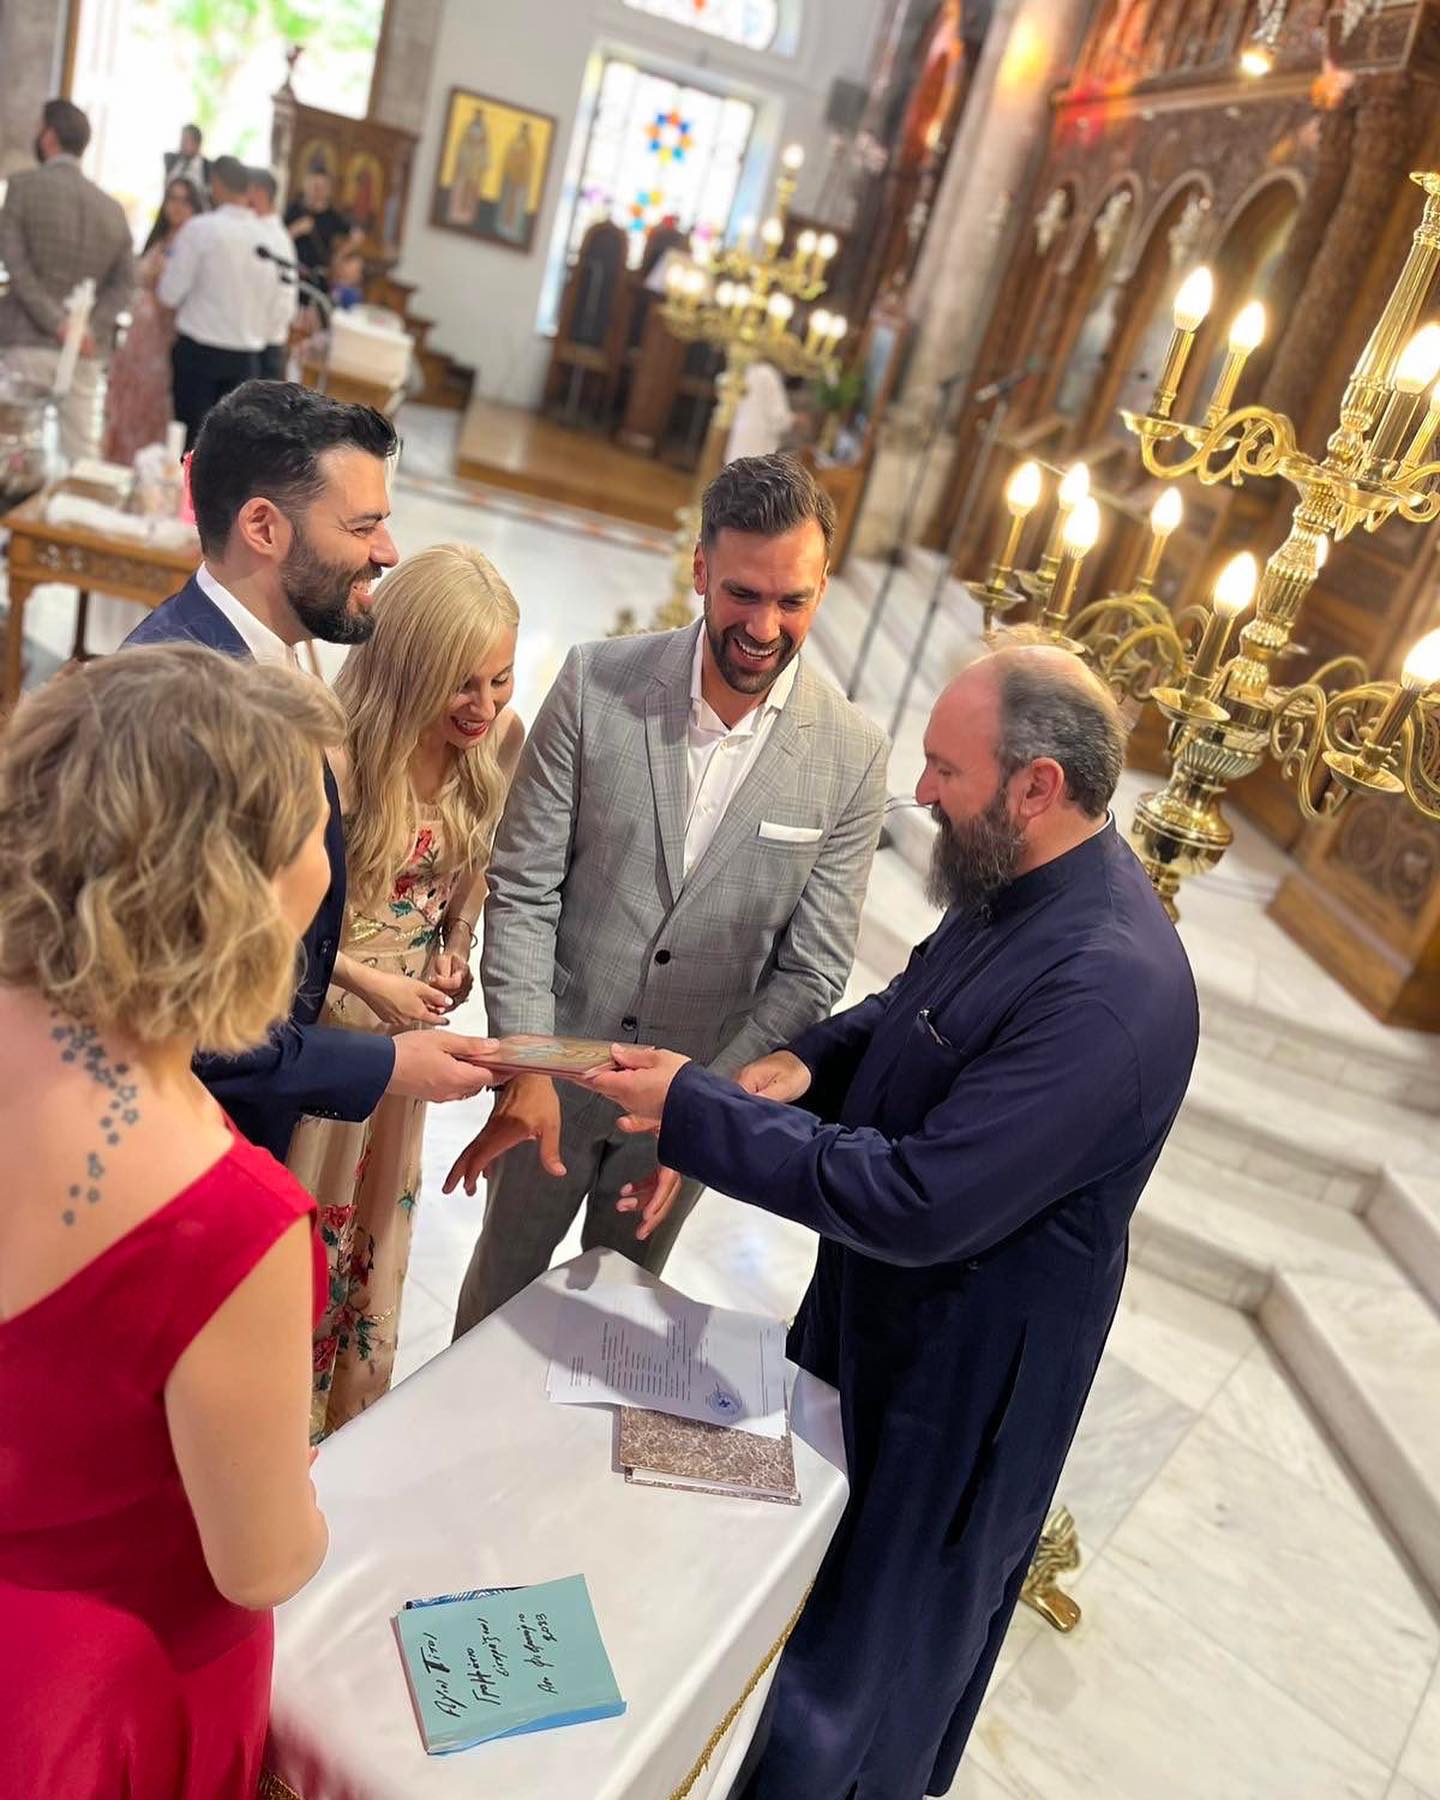 Photo shared by Menia Mathioudaki on June 11 2023 tagging @dimitris vourliotis. May be an image of 5 people wedding and